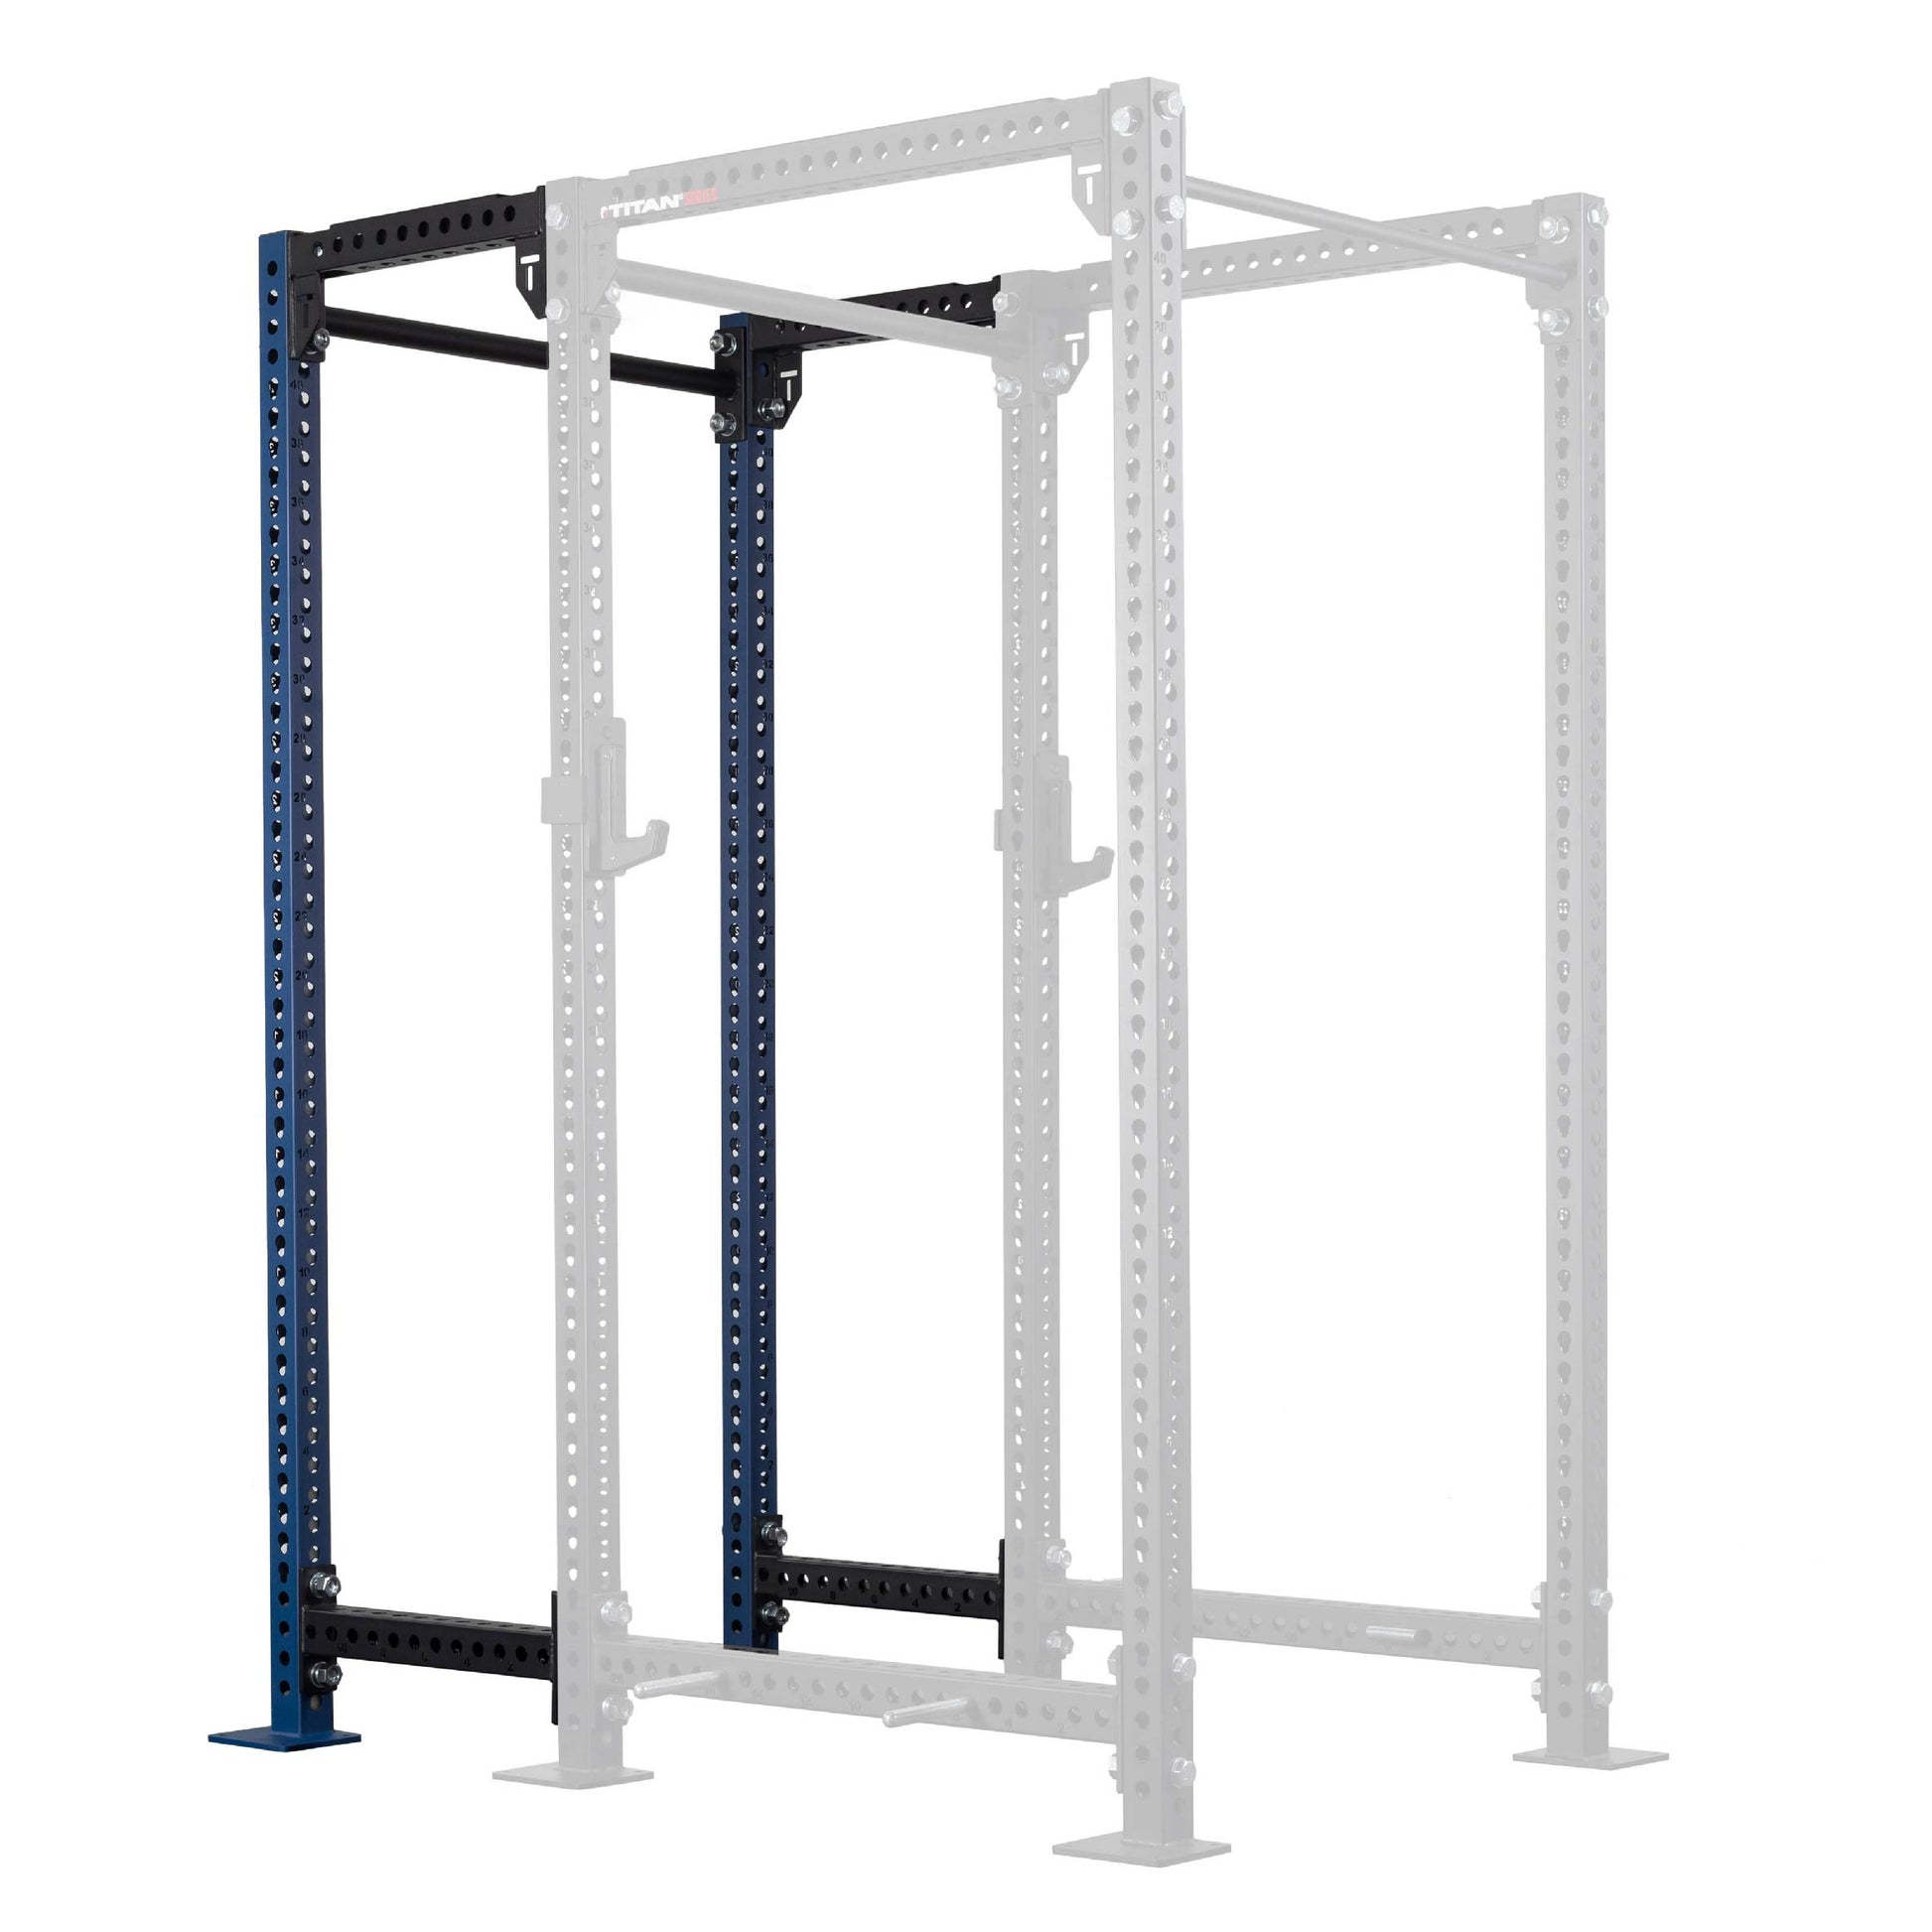 TITAN Series 24" Extension Kit - Extension Color: Navy - Extension Height: 100" - Crossmember: 2" Fat Pull-Up Bar | Navy / 100" / 2" Fat Pull-Up Bar